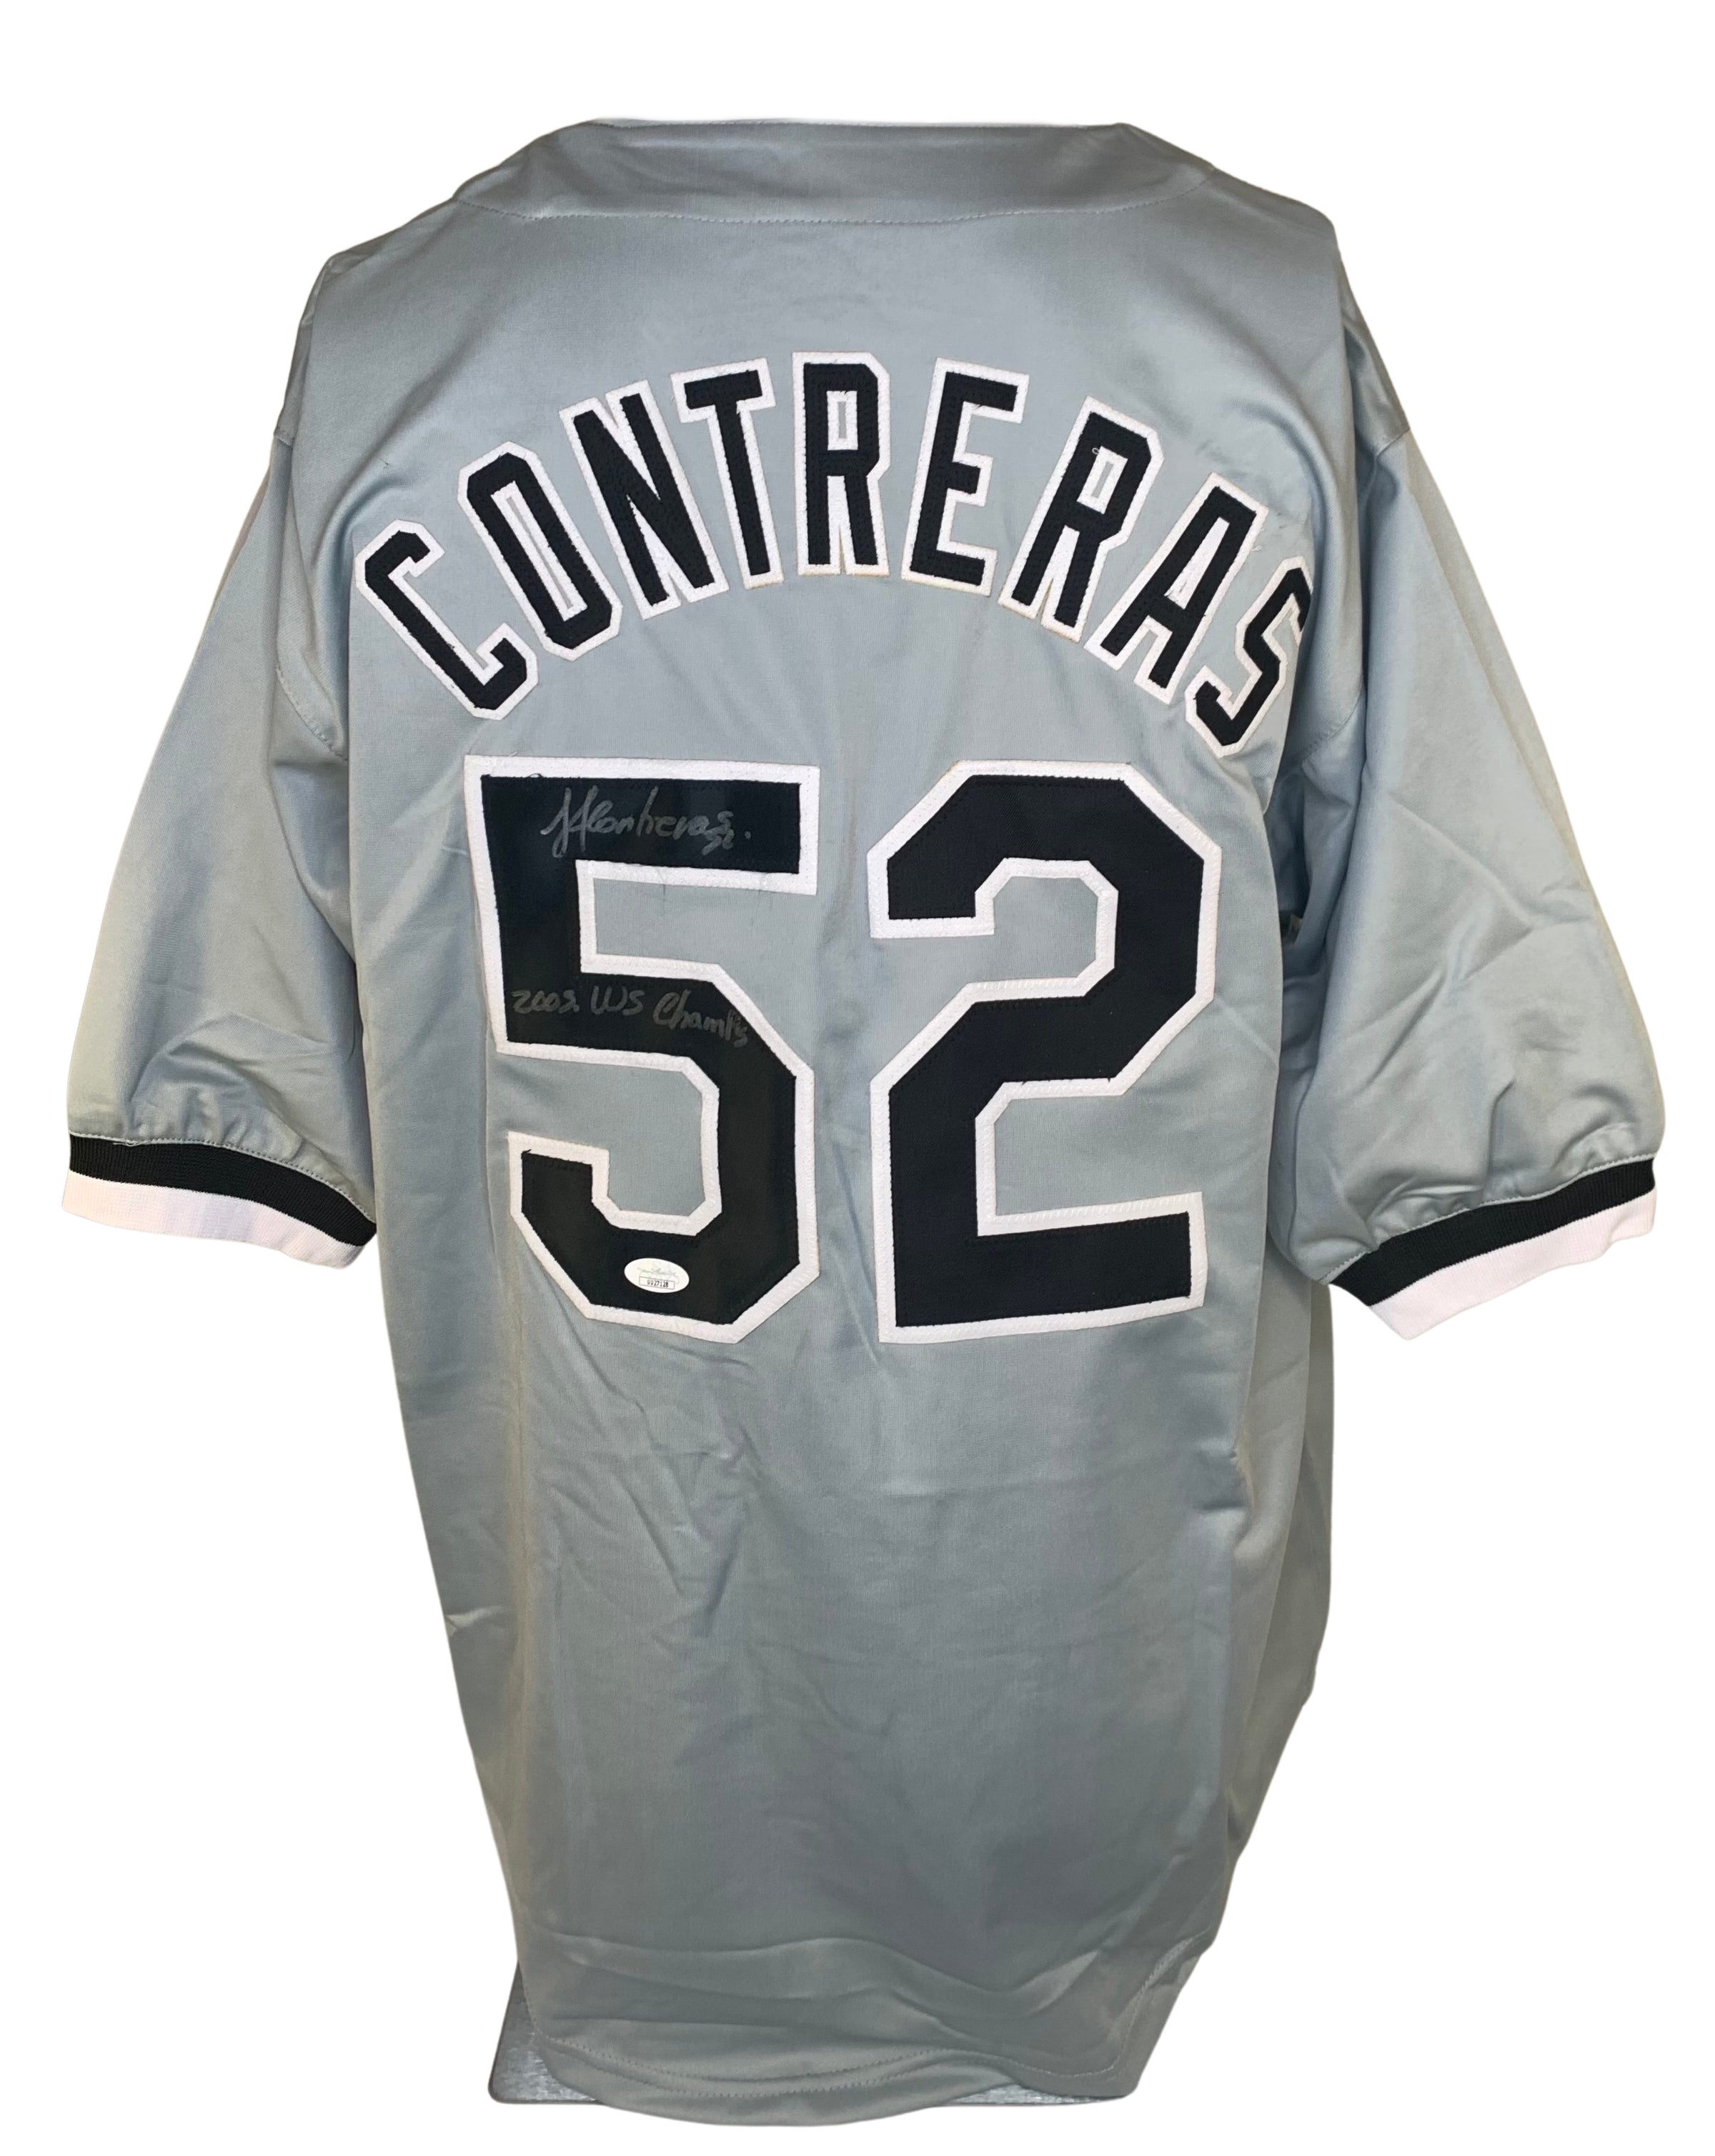 Jose Contreras autographed signed inscribed jersey MLB Chicago White S –  JAG Sports Marketing